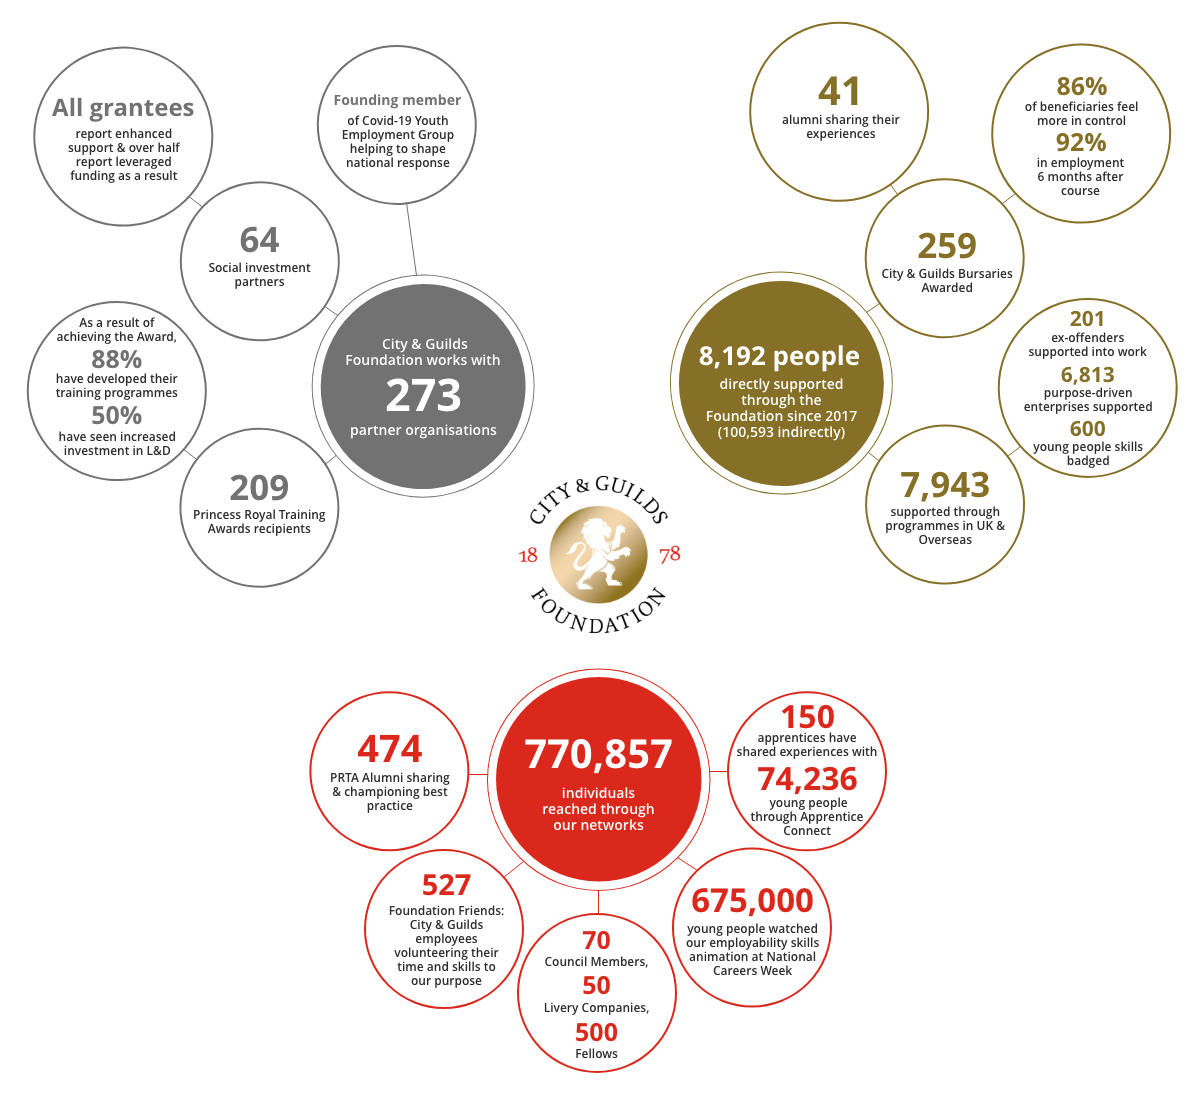 City & Guilds Foundation - our impact in numbers